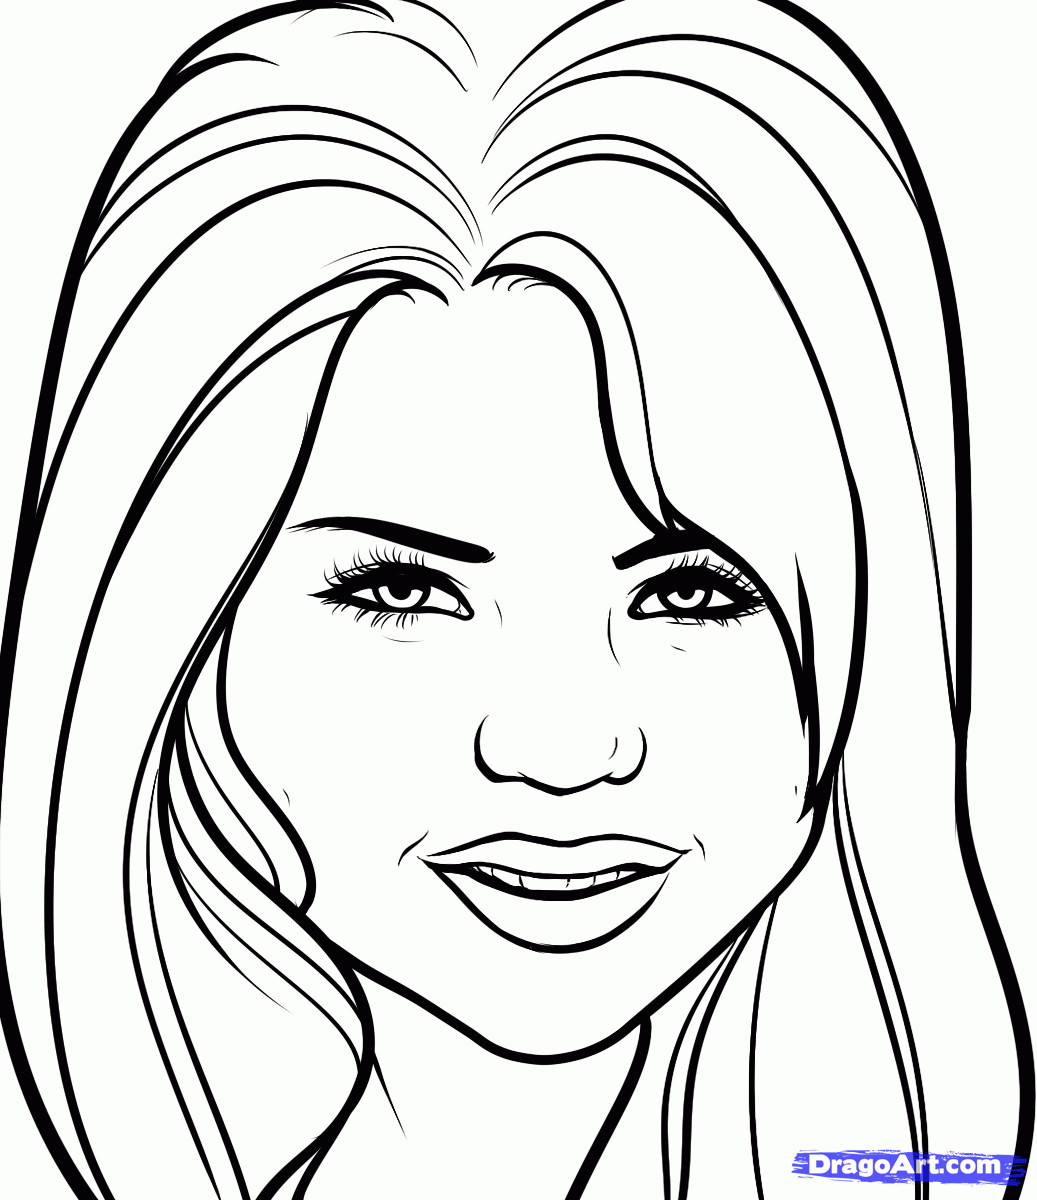 Wizards Of Waverly Place Printable Coloring Pages
 Wizards Waverly Place Coloring Page Coloring Home